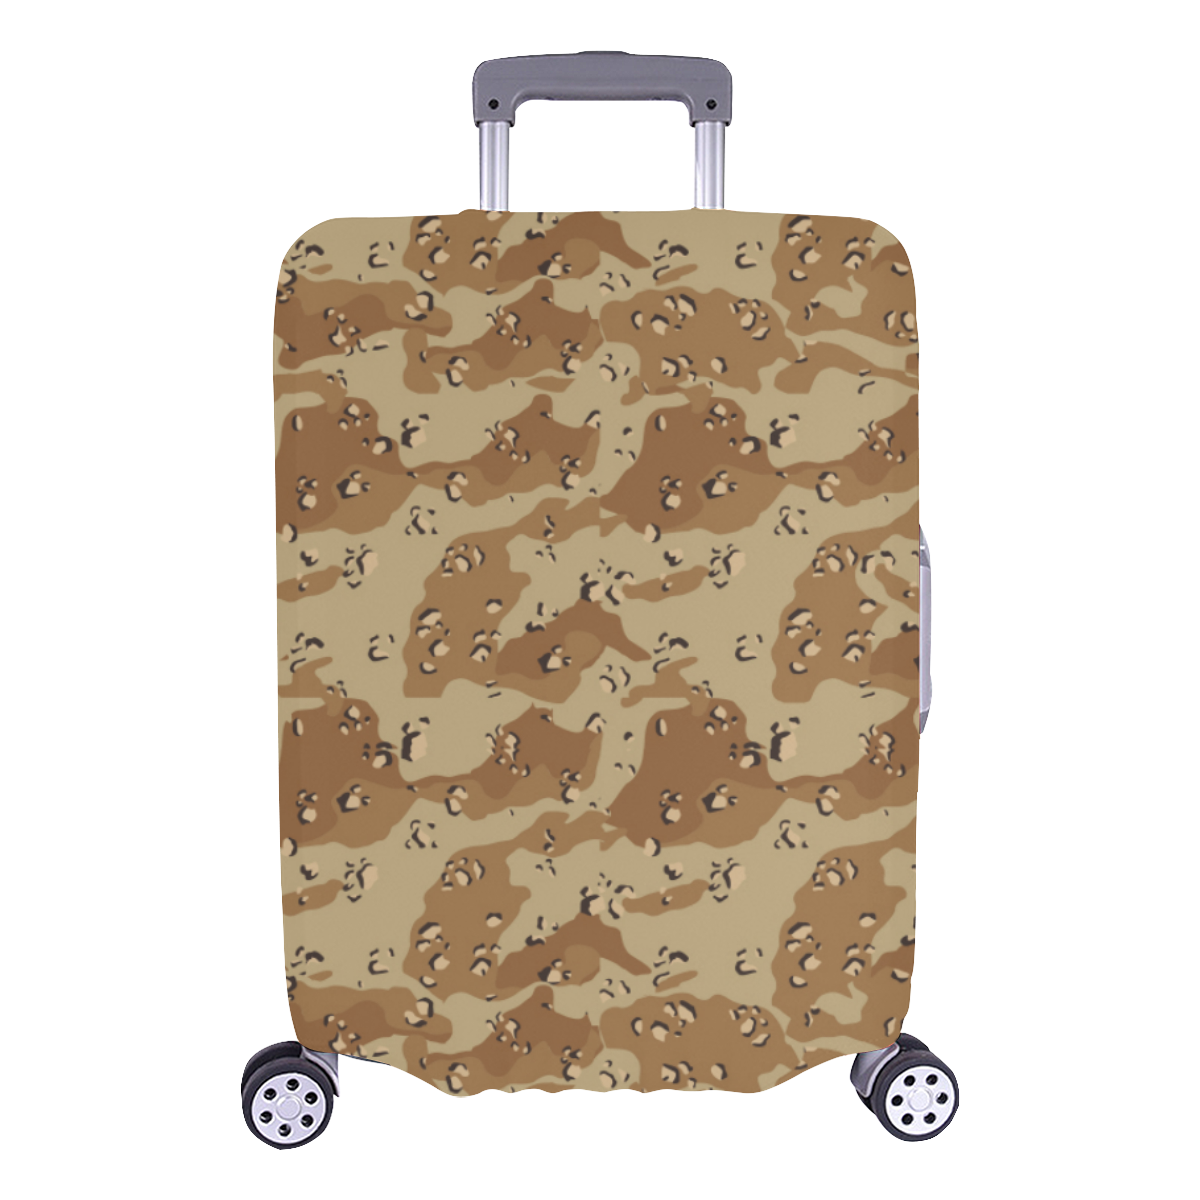 Vintage Desert Brown Camouflage Luggage Cover/Large 26"-28"